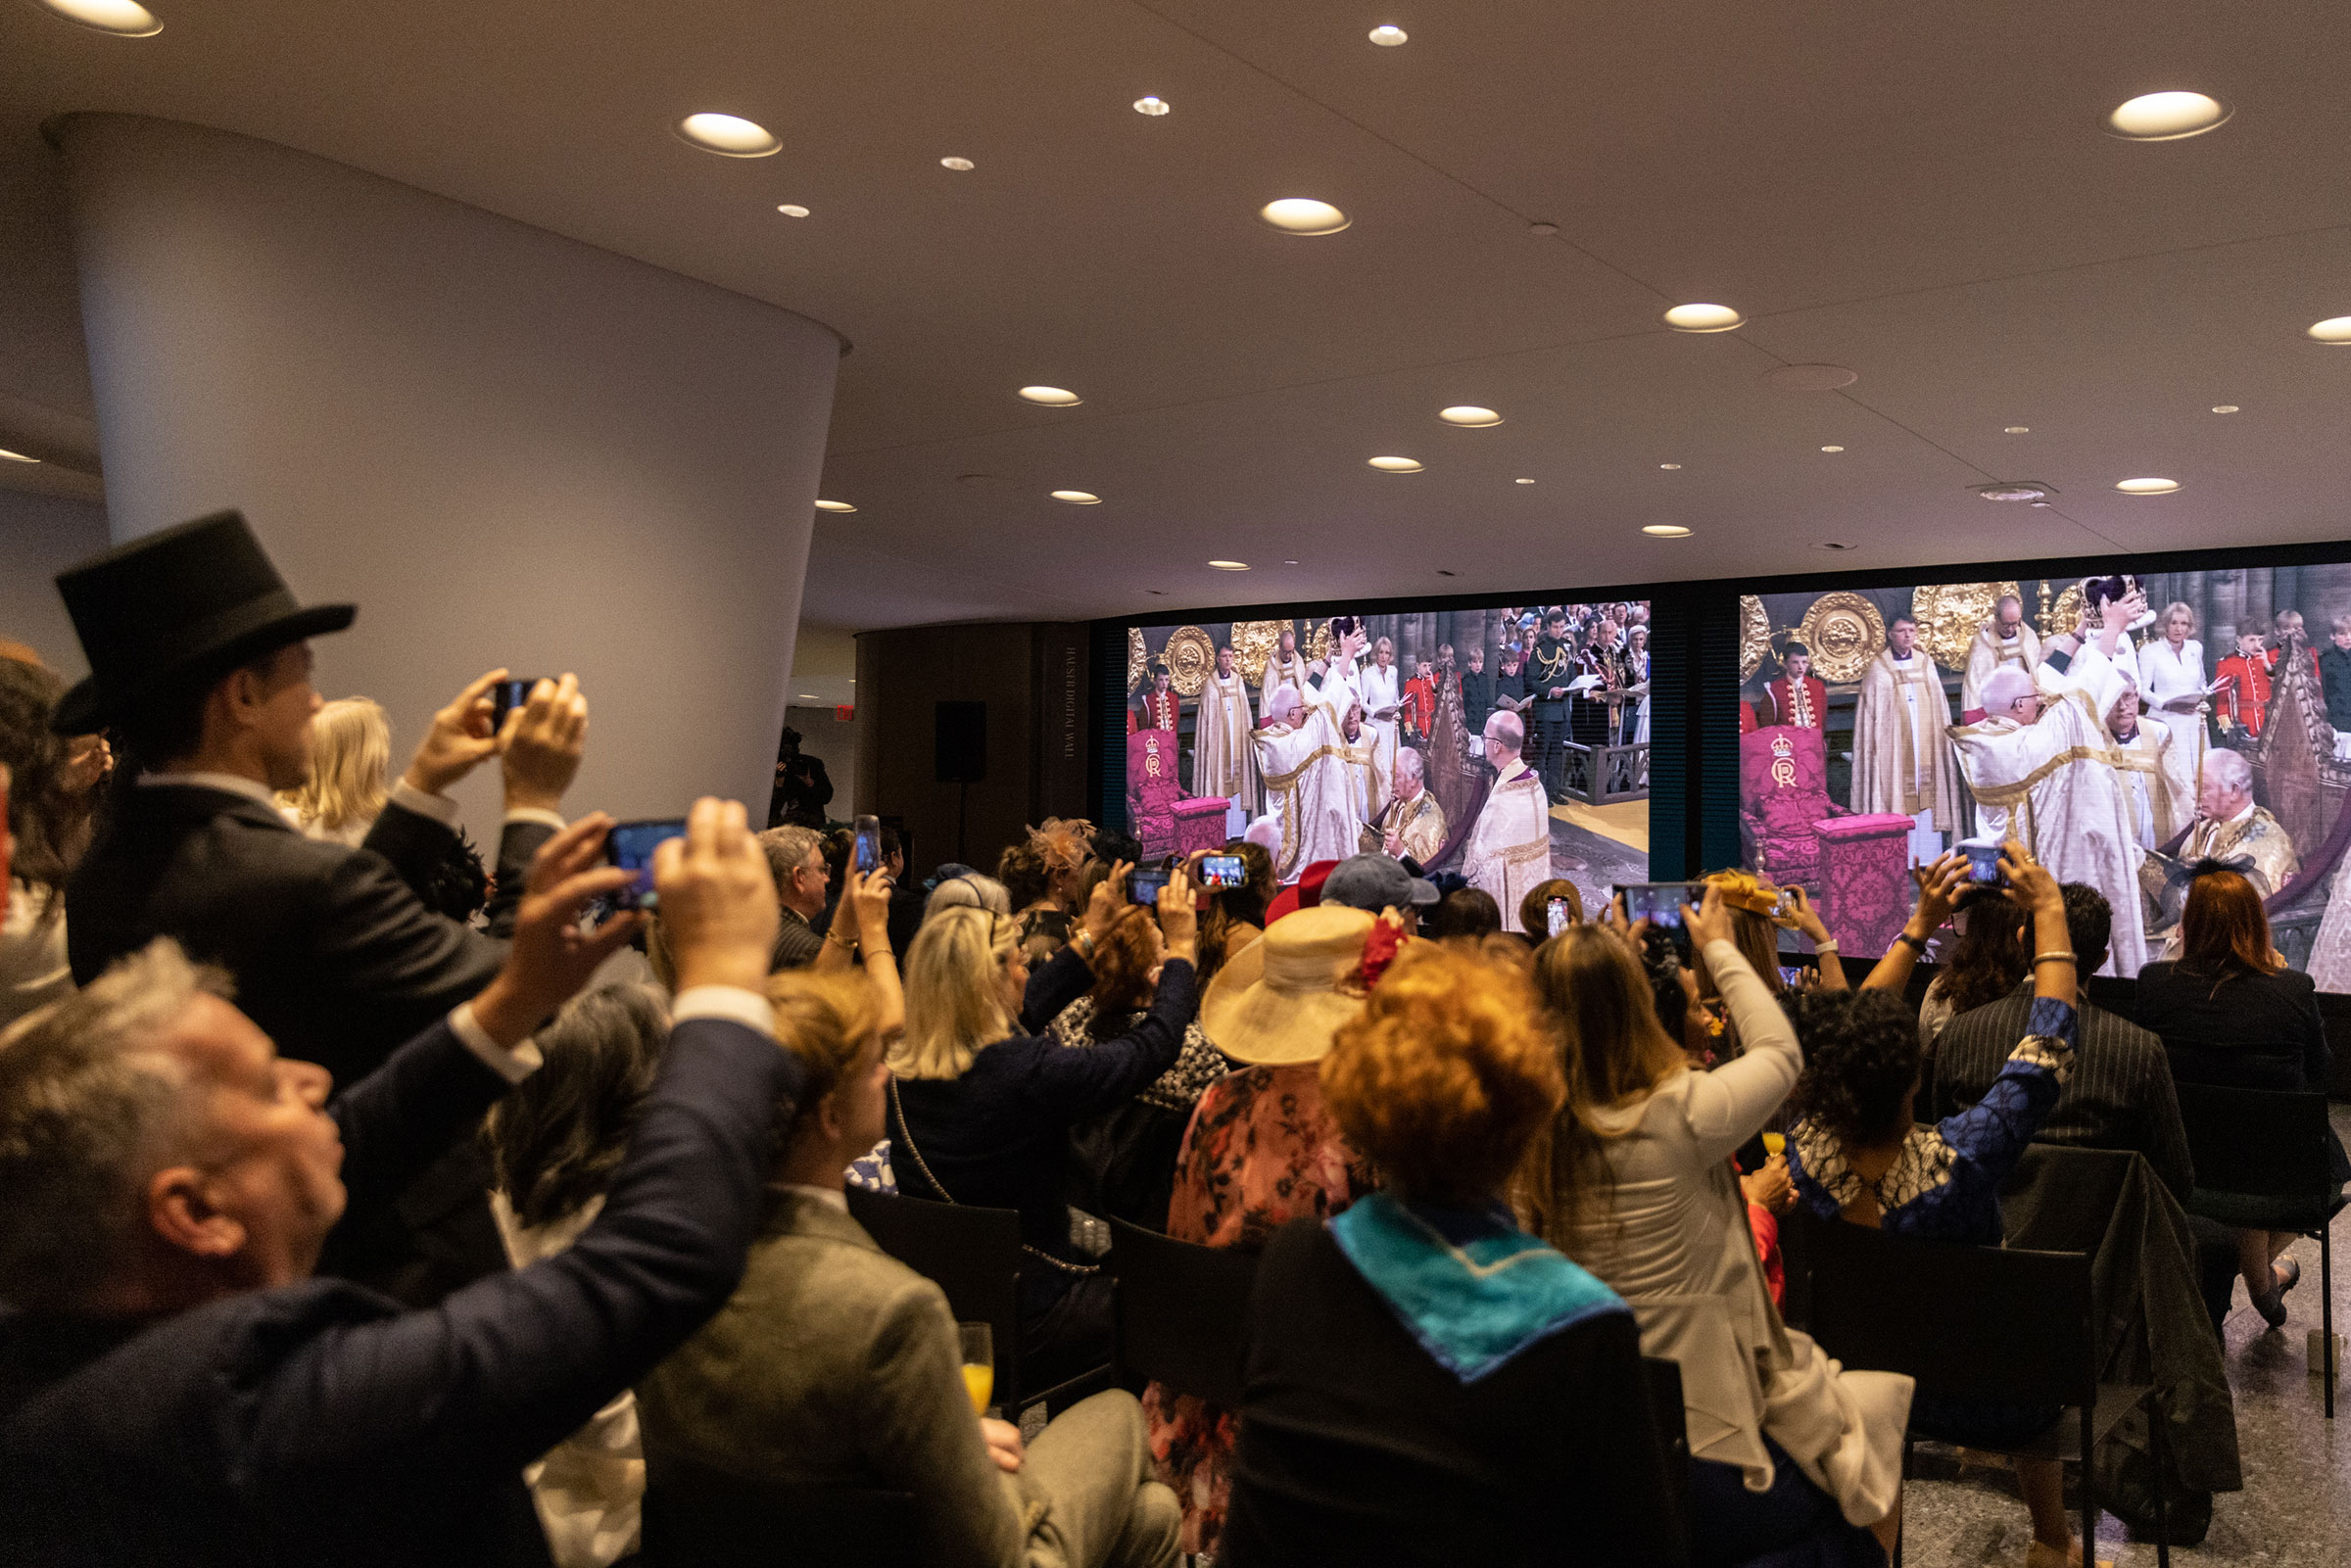 People watch a television screening of the coronation of King Charles III during the Coronation party at Lincoln Center in New York City. (Jeenah Moon—Getty Images)